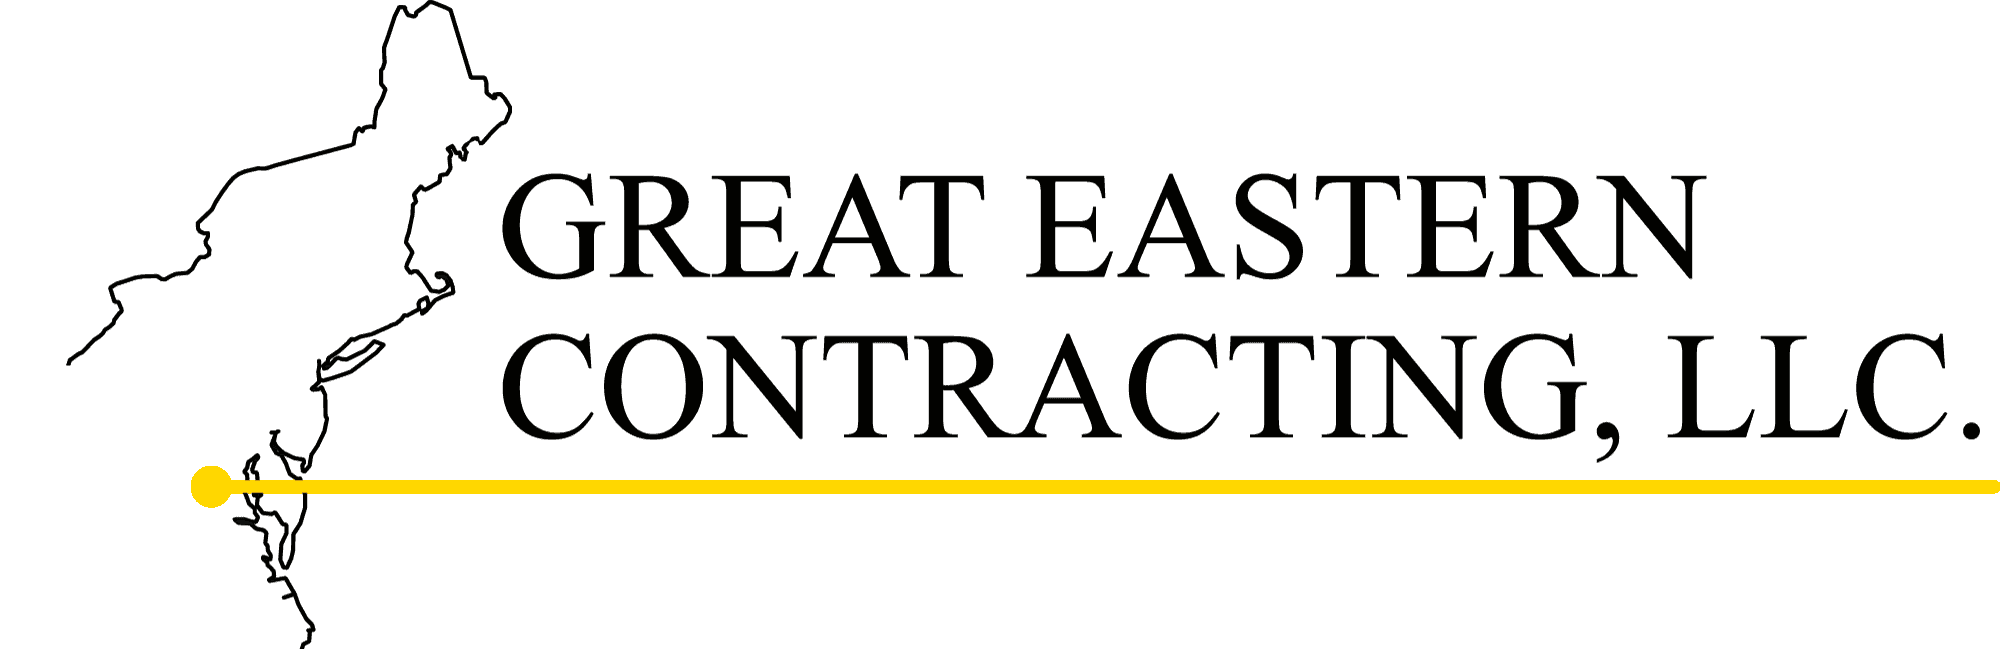 Great Eastern Contracting Logo